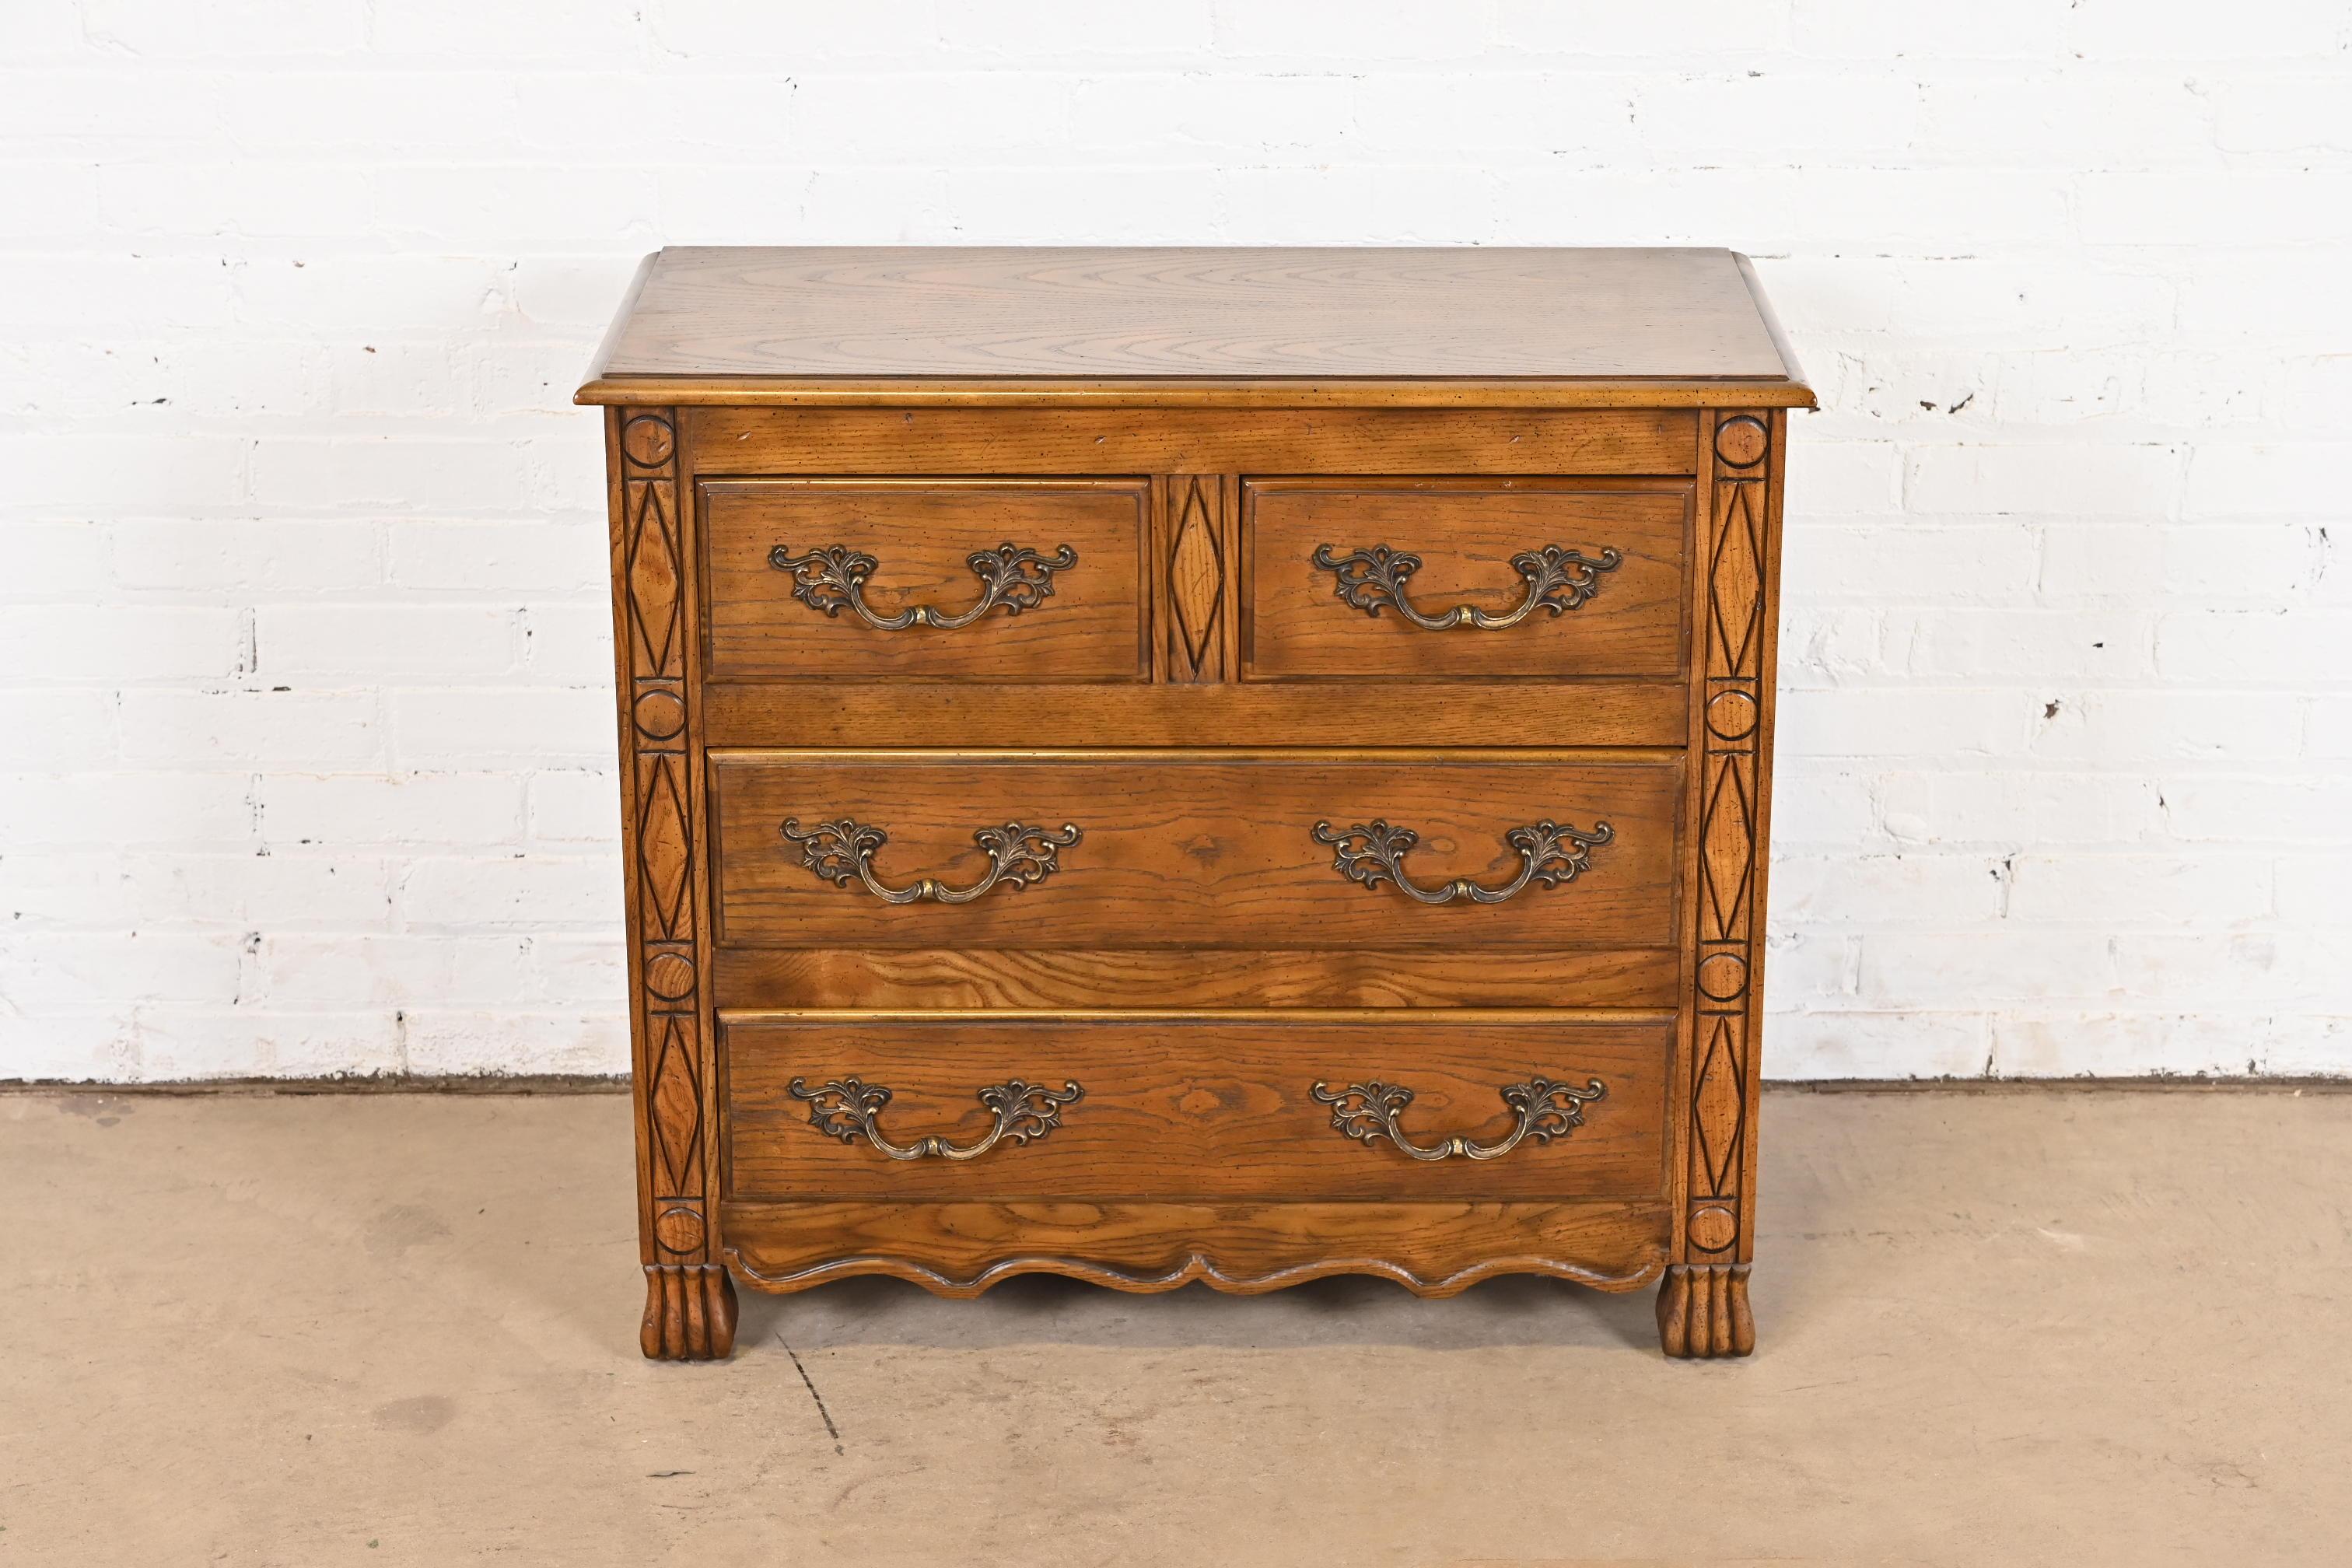 1970s french provincial furniture